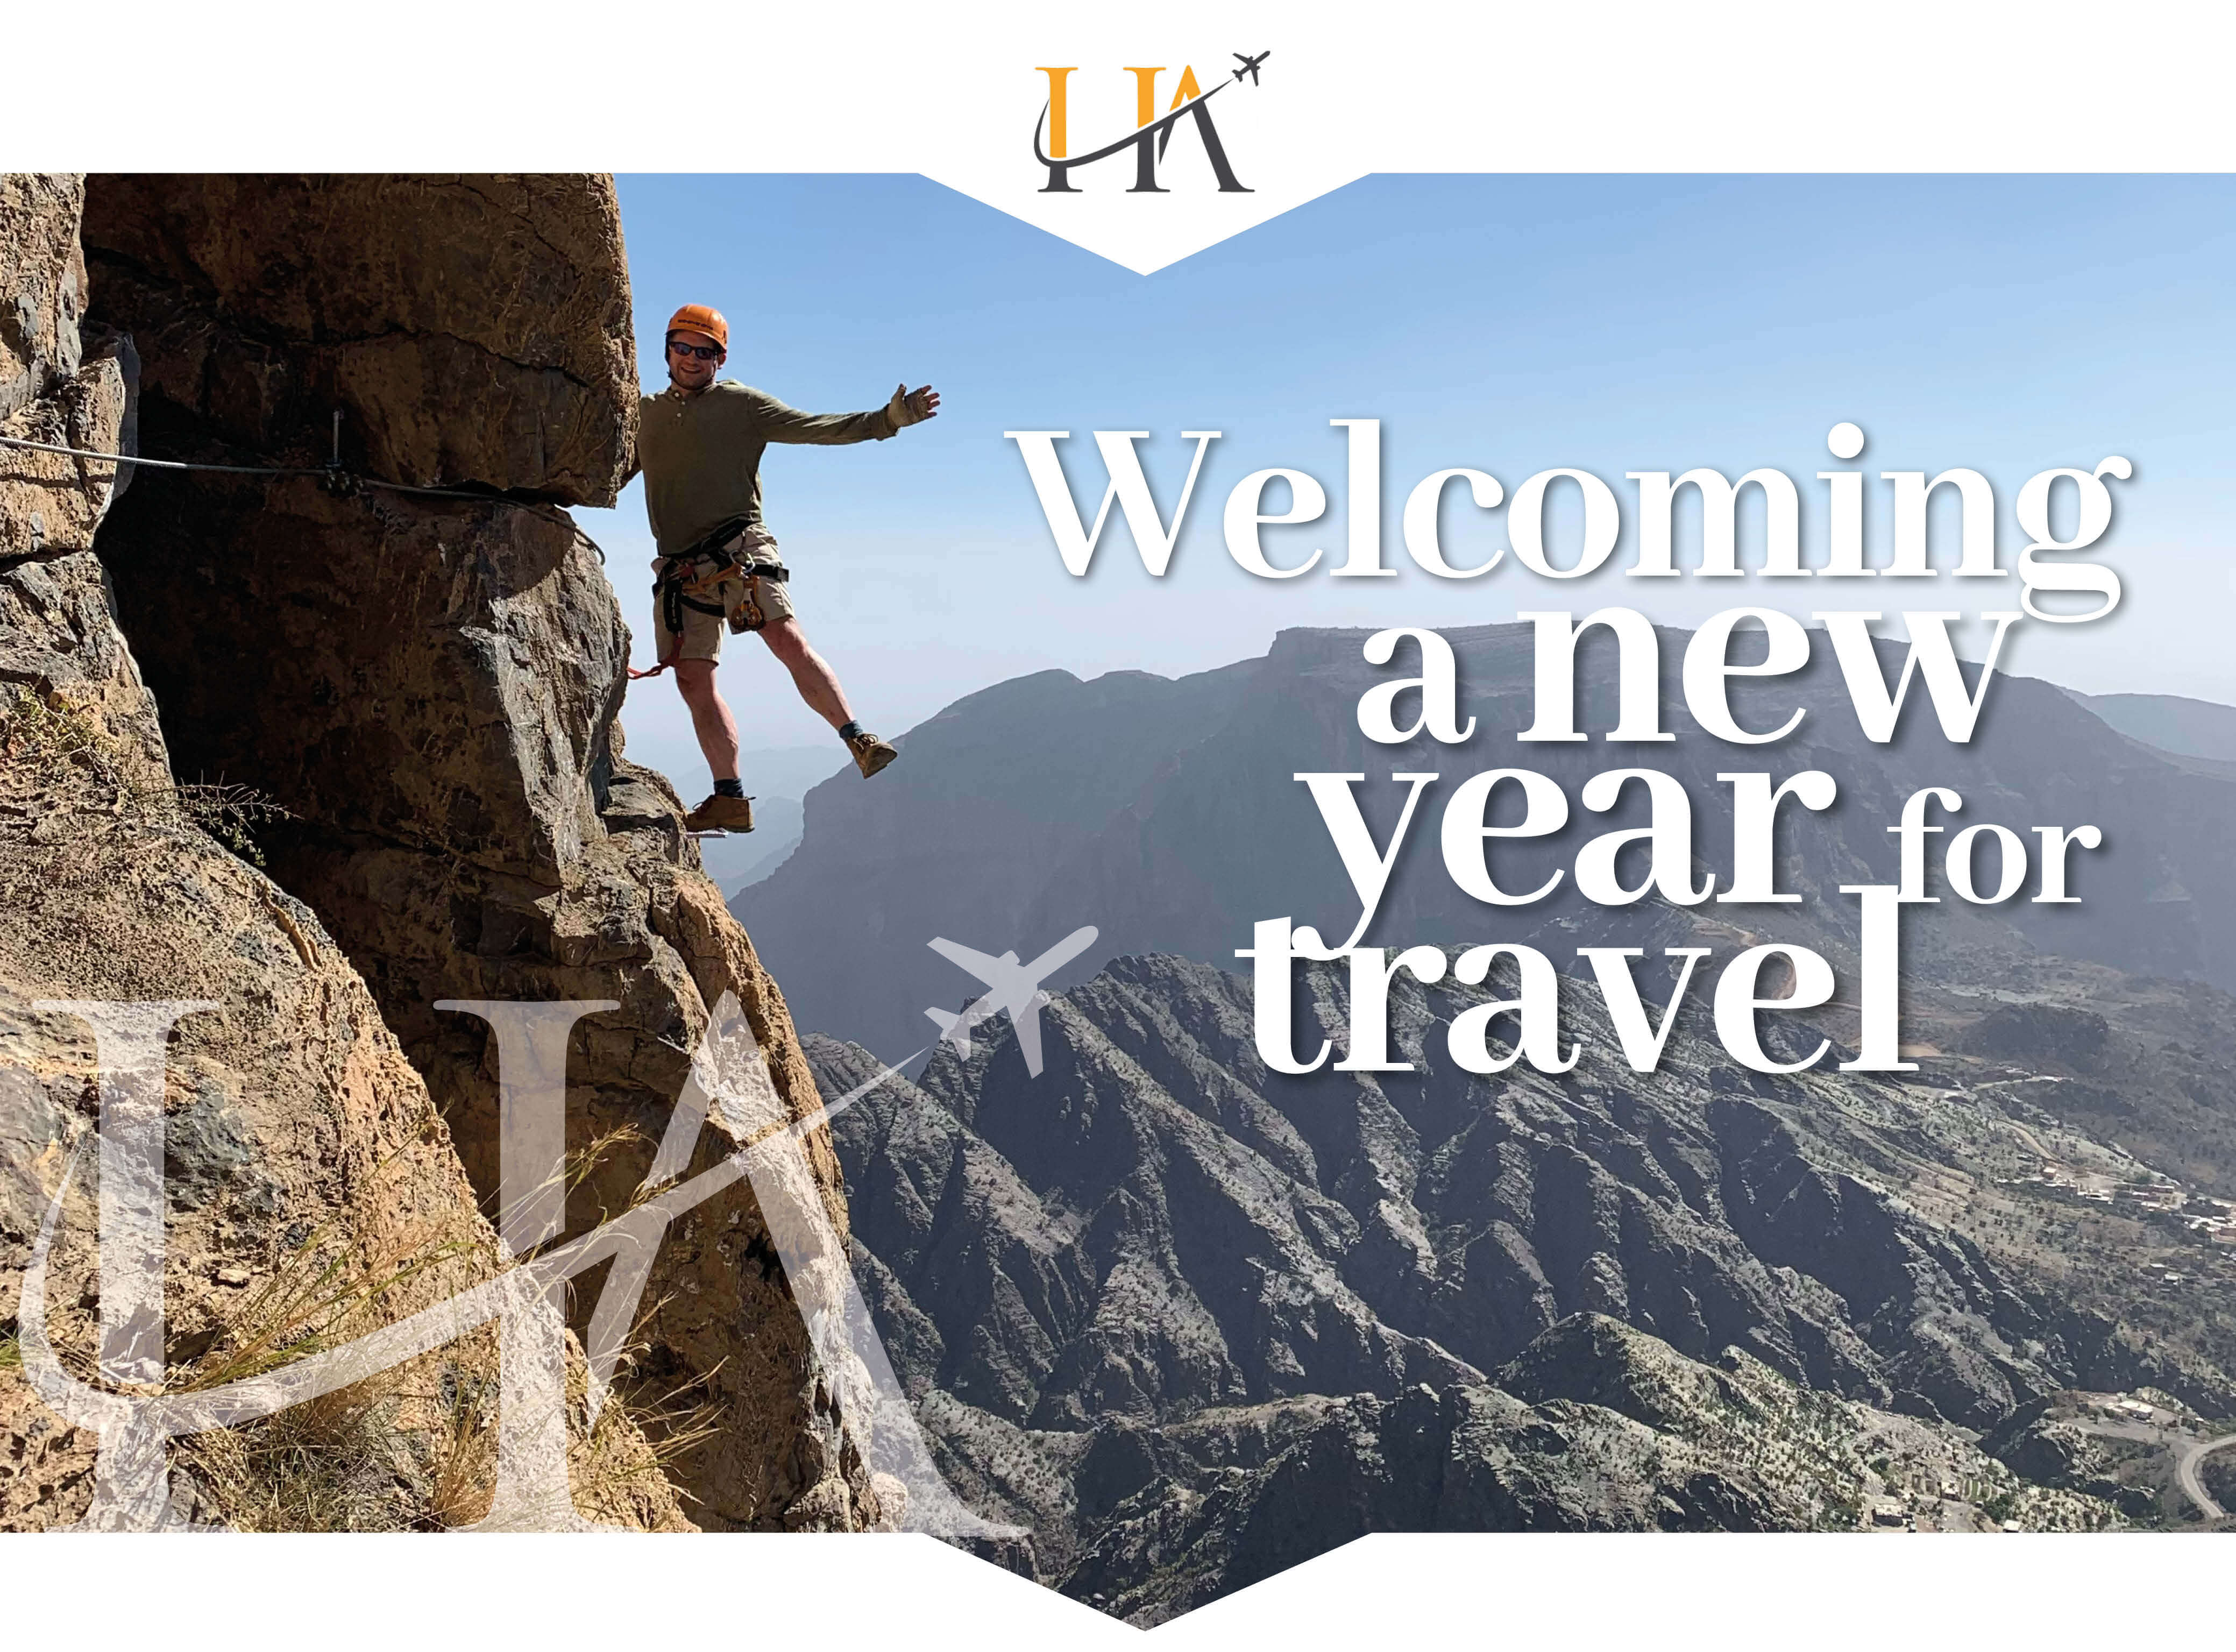 Welcoming a new year for travel_header build